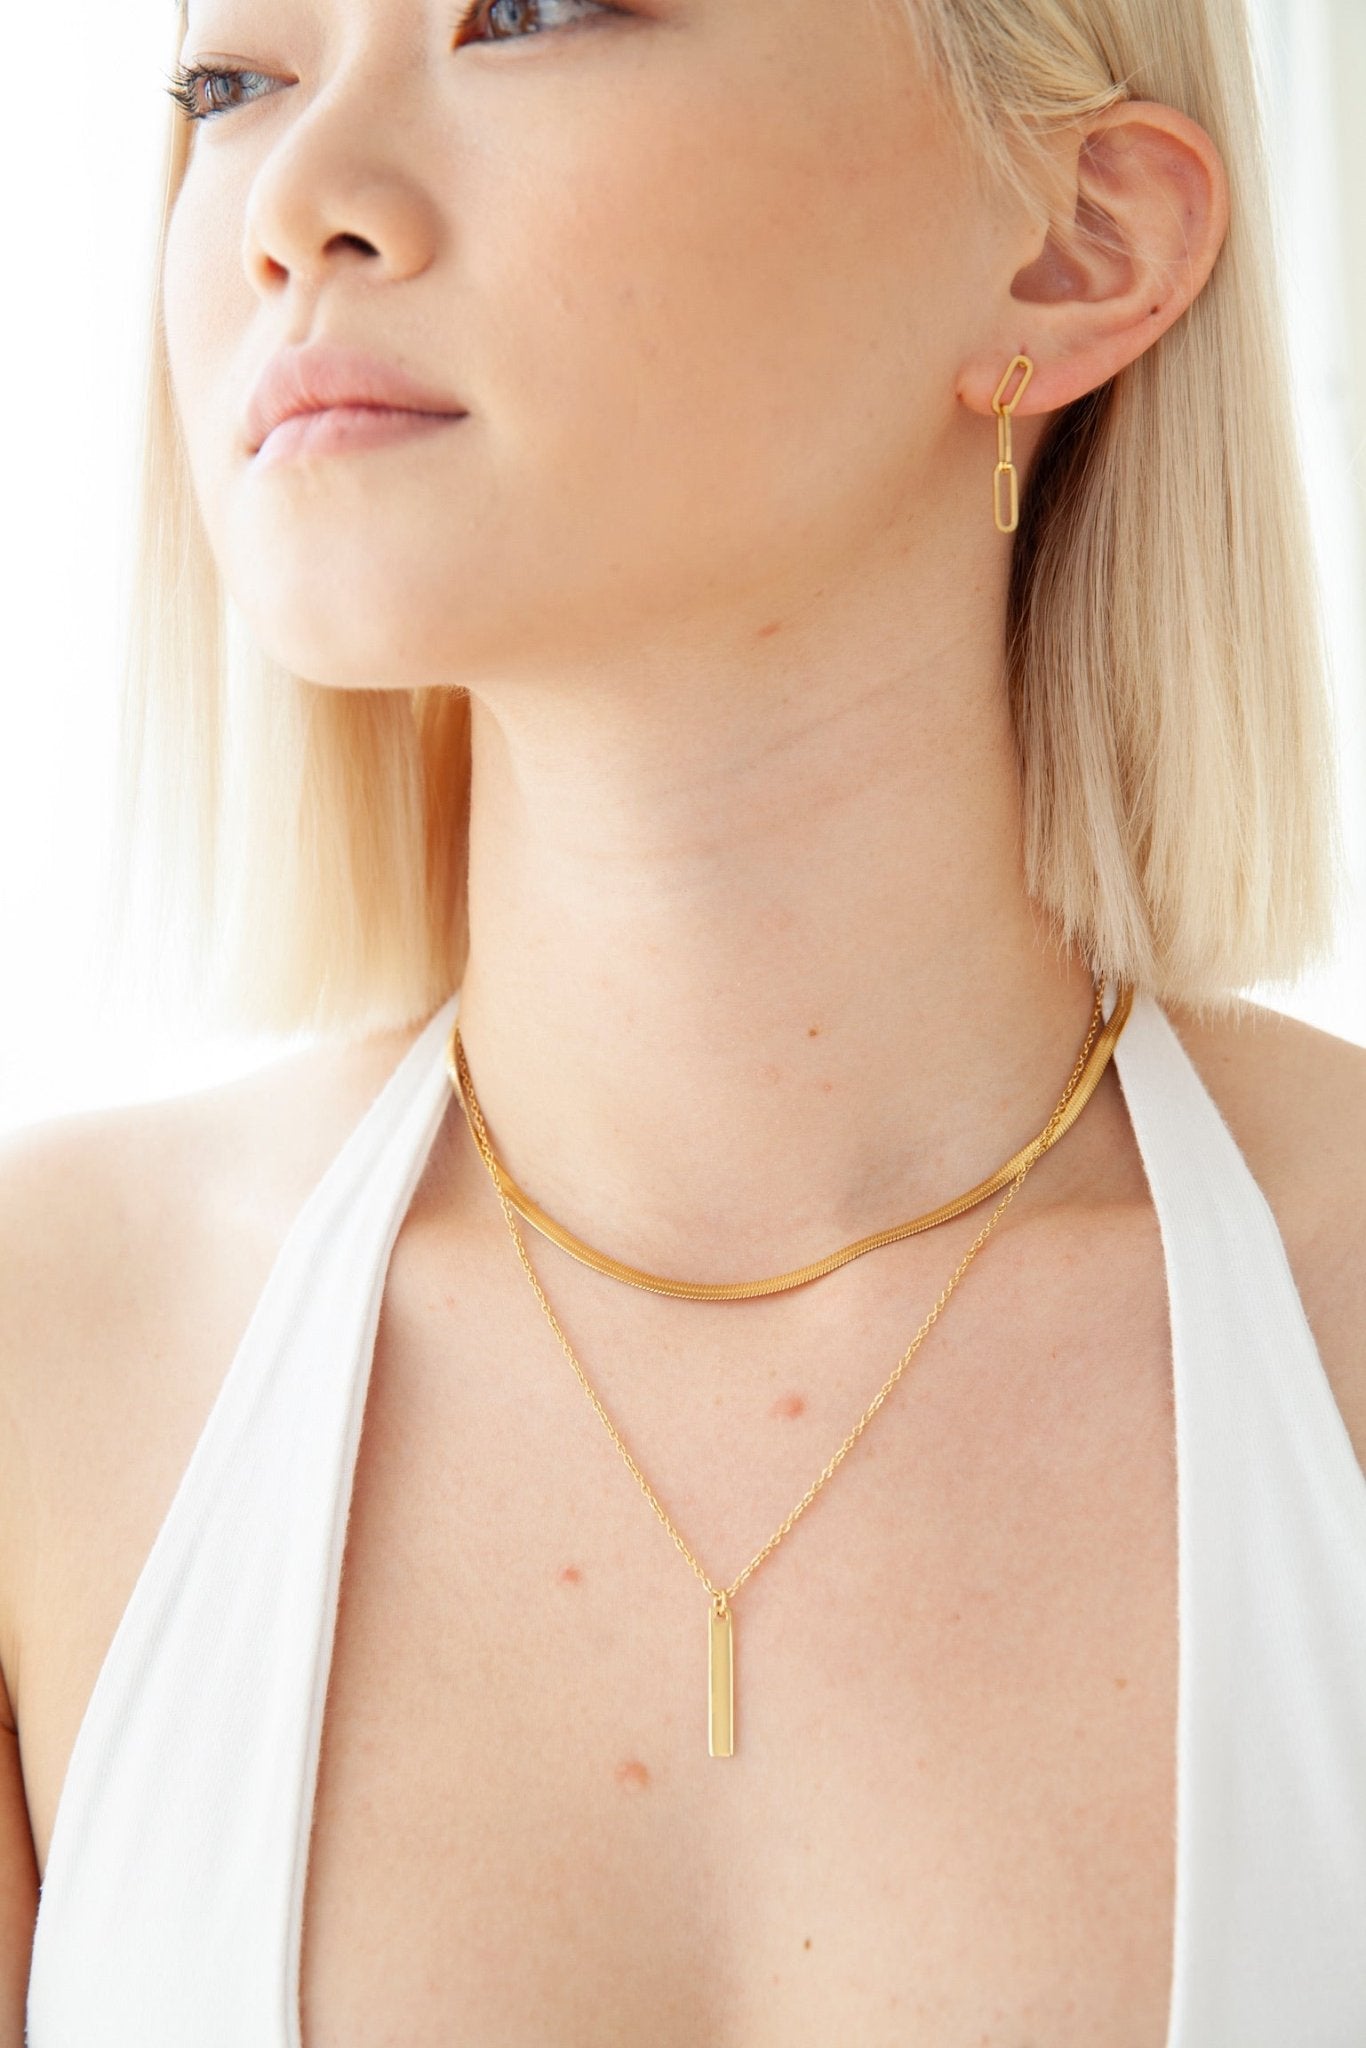 Gwendolyn Gold Herringbone Chain Necklace - Flaire & Co.